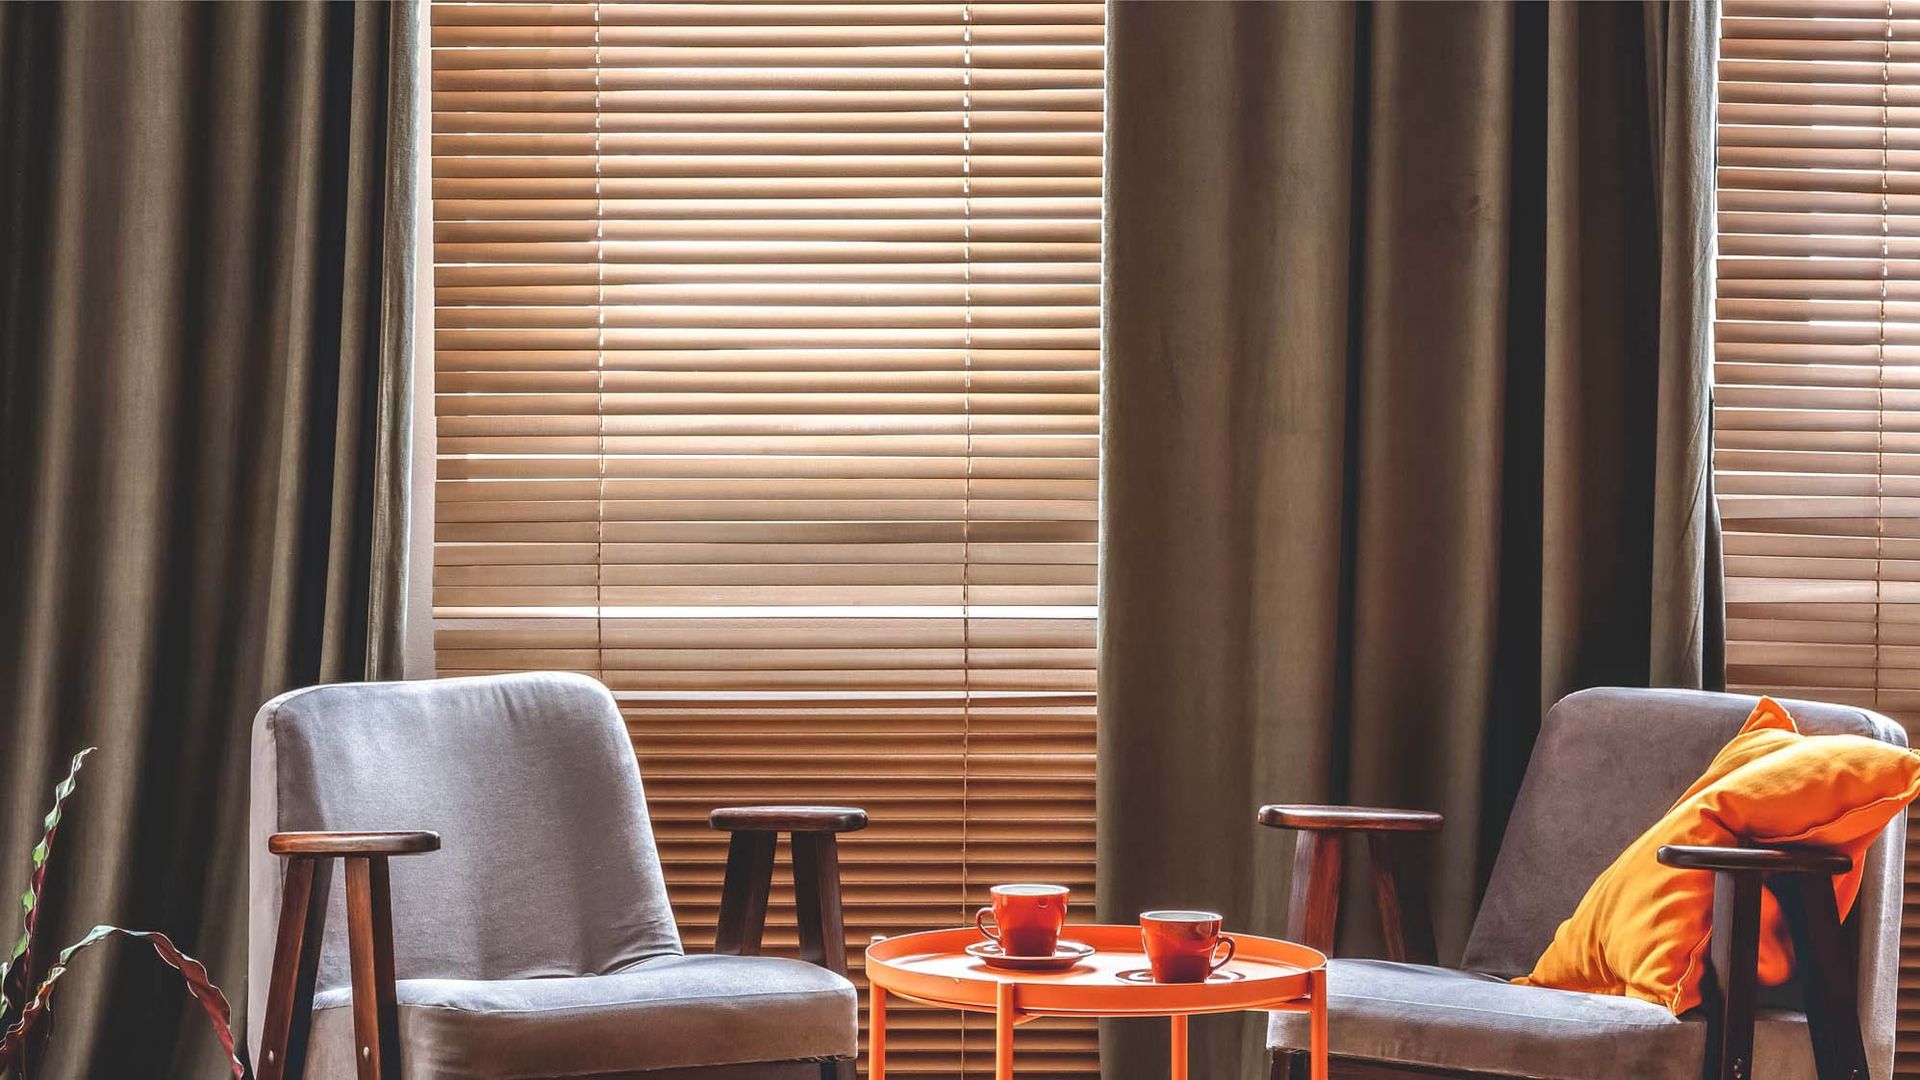 Blinds Vs Curtains Which Is Better Toms Guide 2550